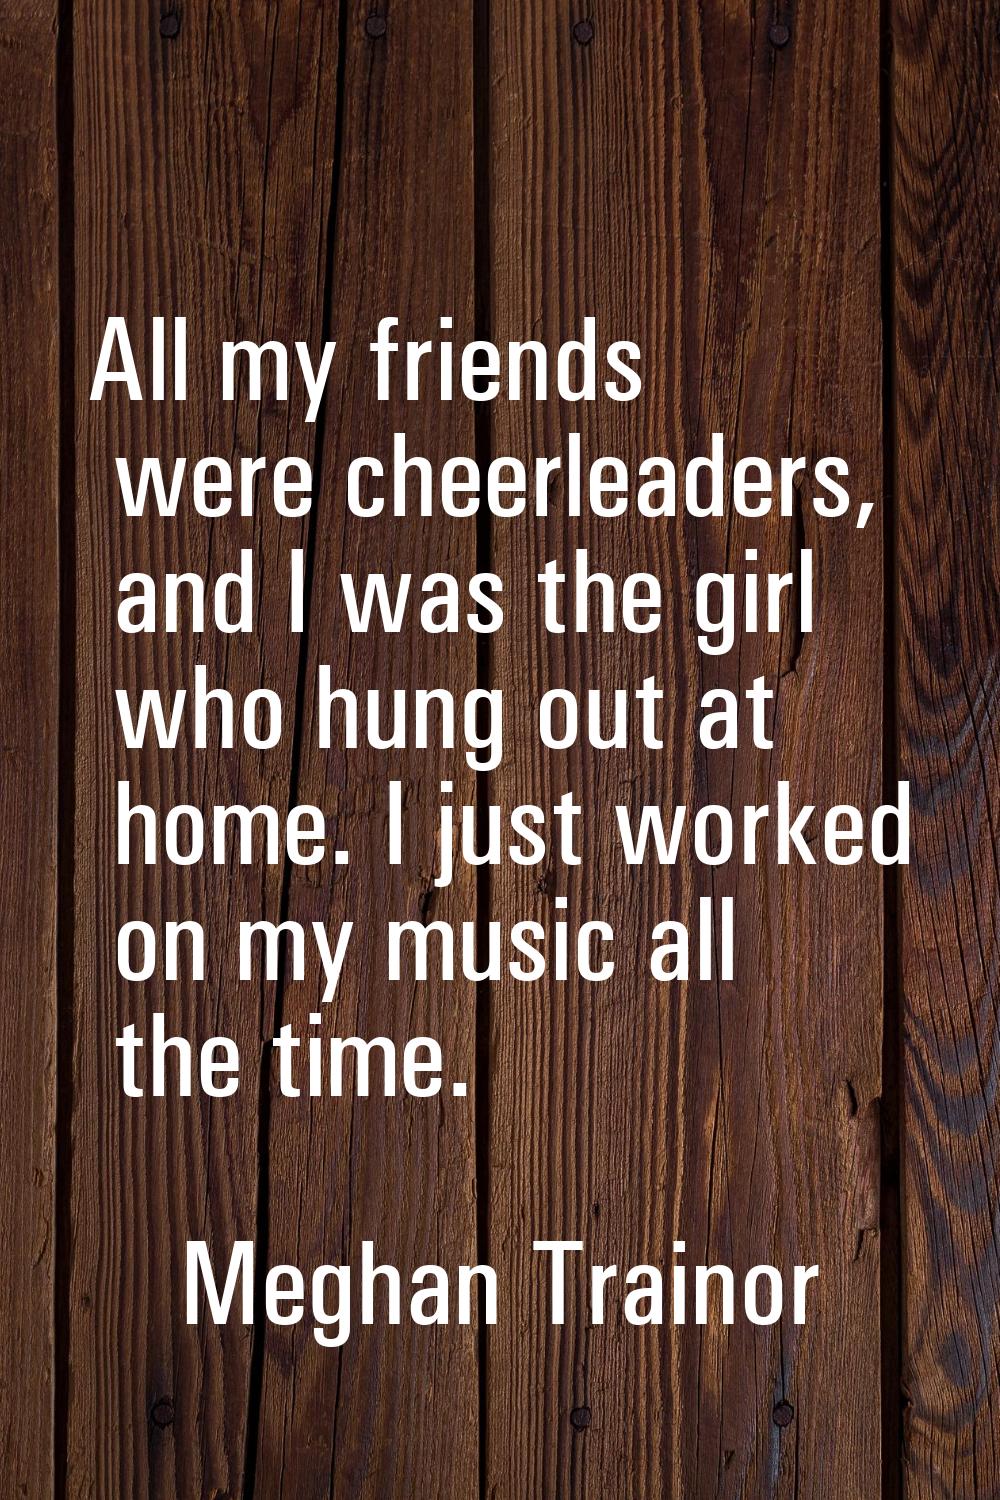 All my friends were cheerleaders, and I was the girl who hung out at home. I just worked on my musi